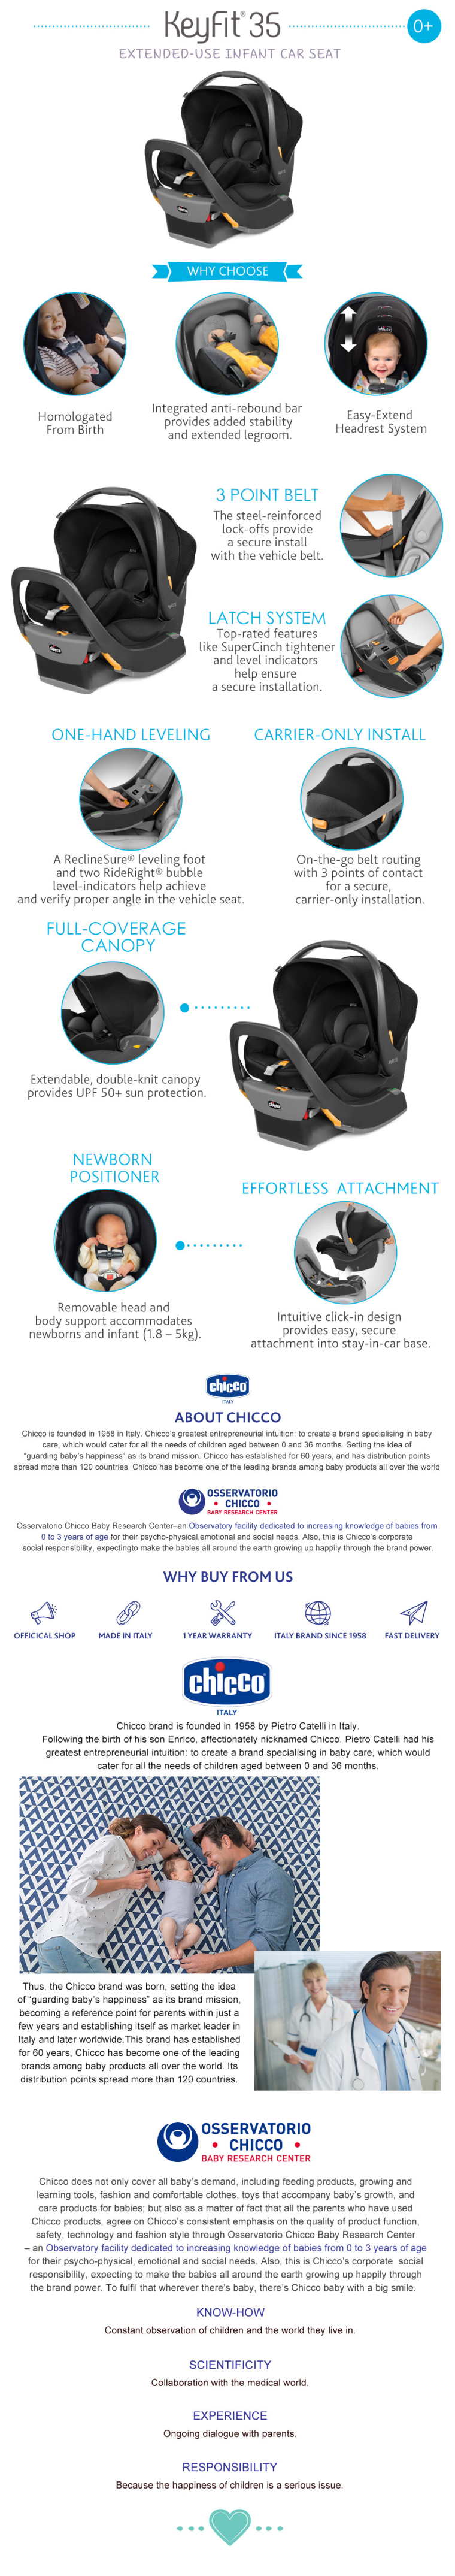 Chicco KeyFit35 Infant Carrier Car Seat with base - Element